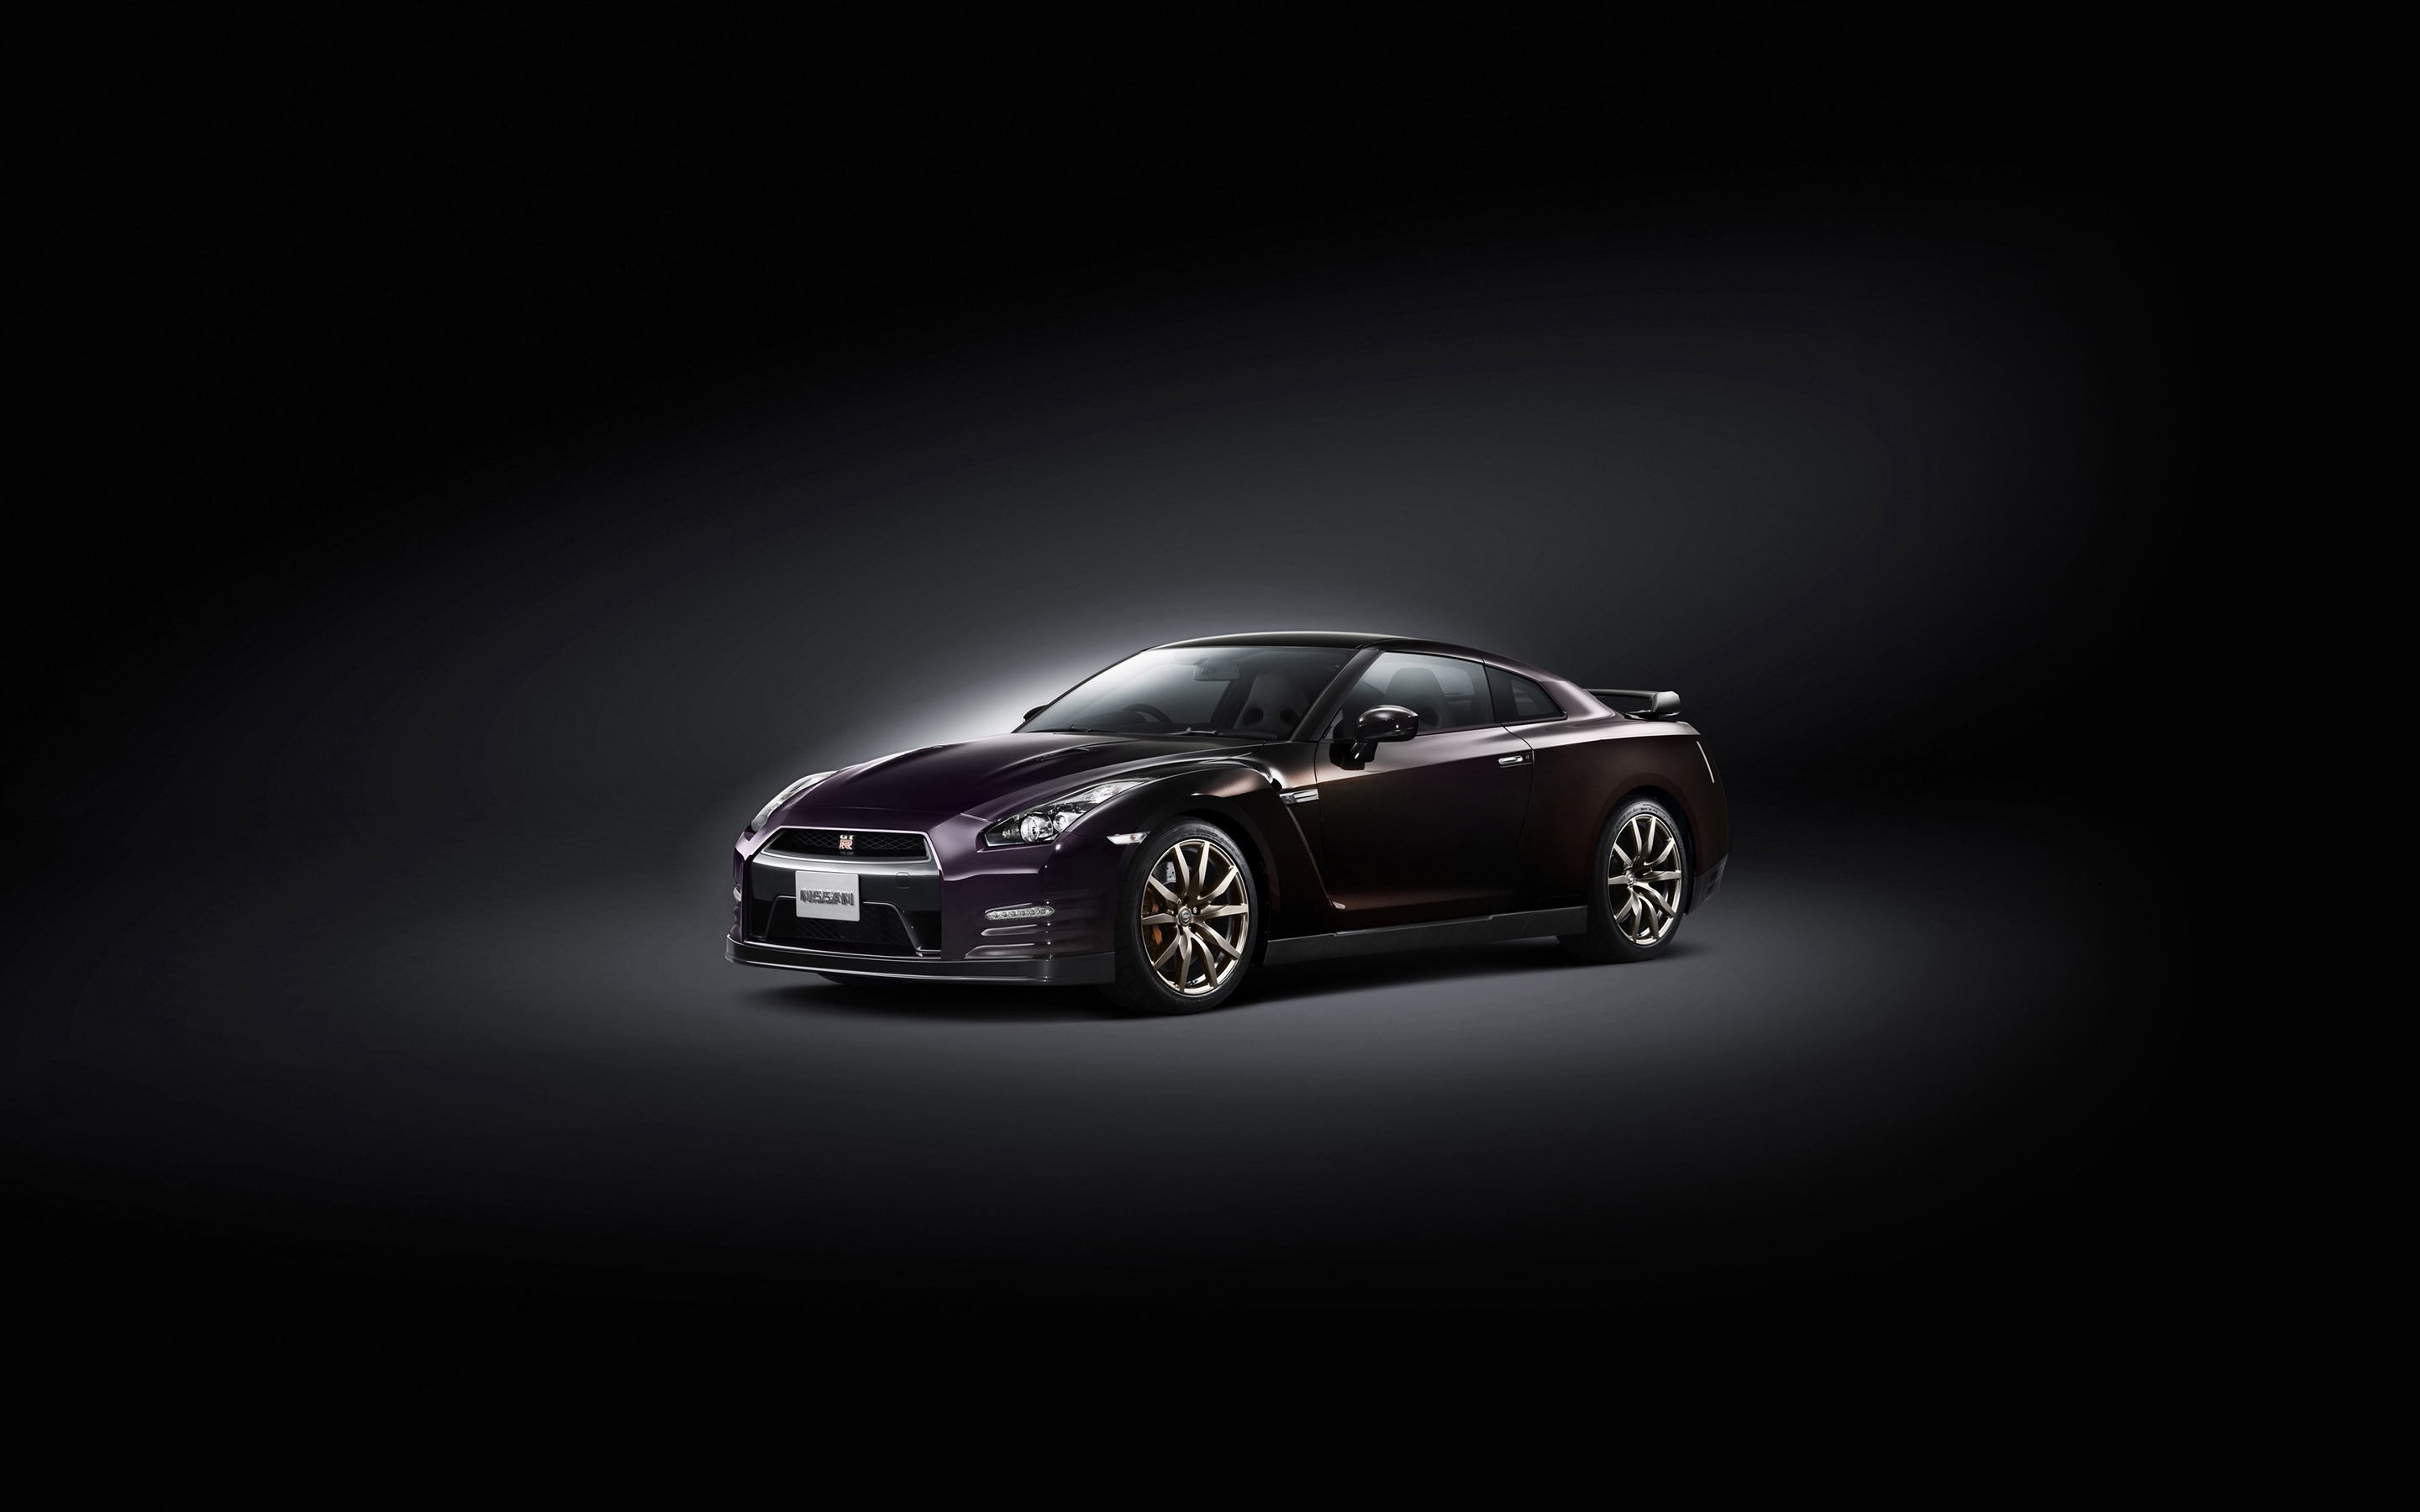 Nissan GT-R Special Edition 2014 for 2880 x 1800 Retina Display resolution